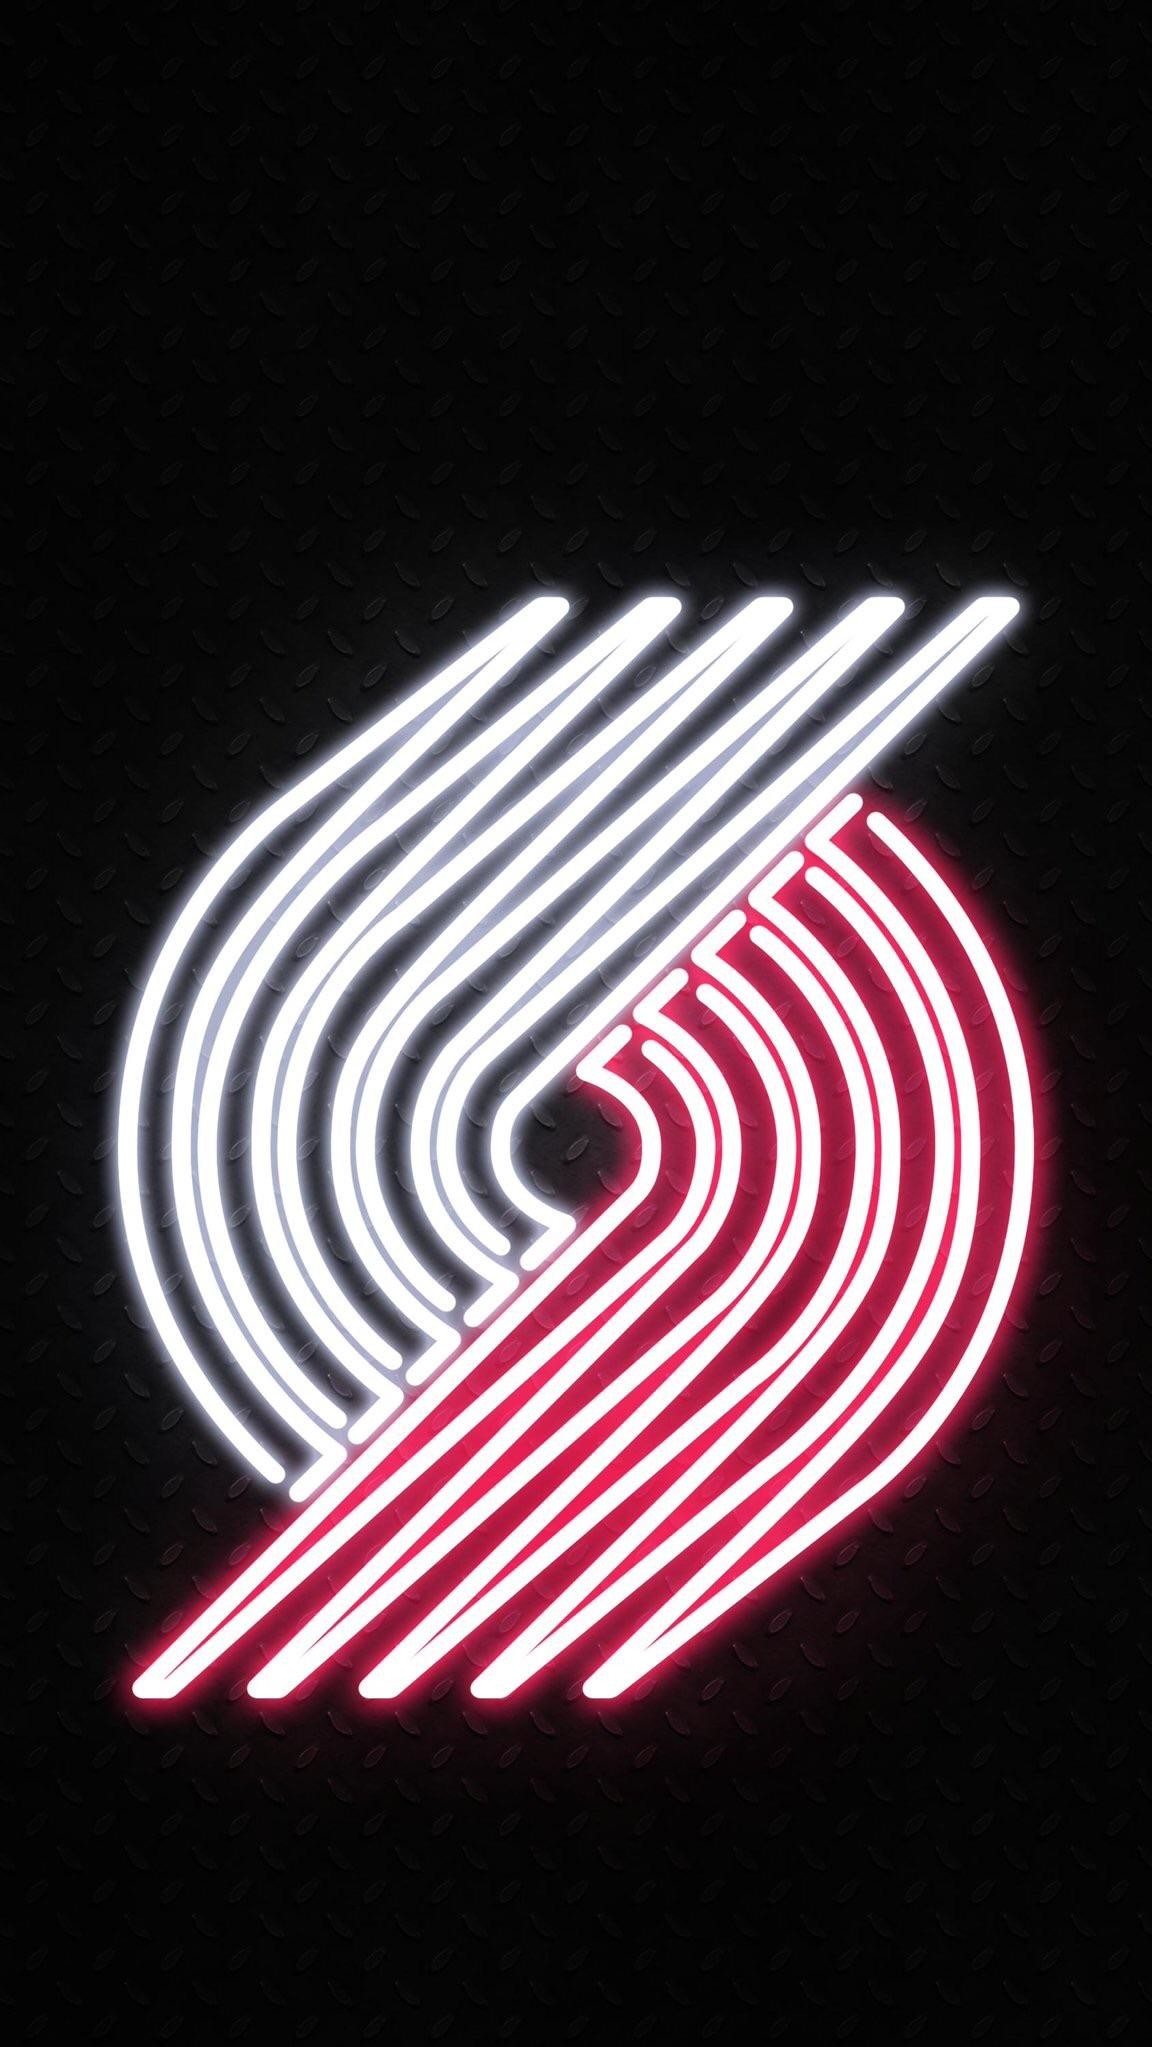 1152x2047 Rip City Wallpapers